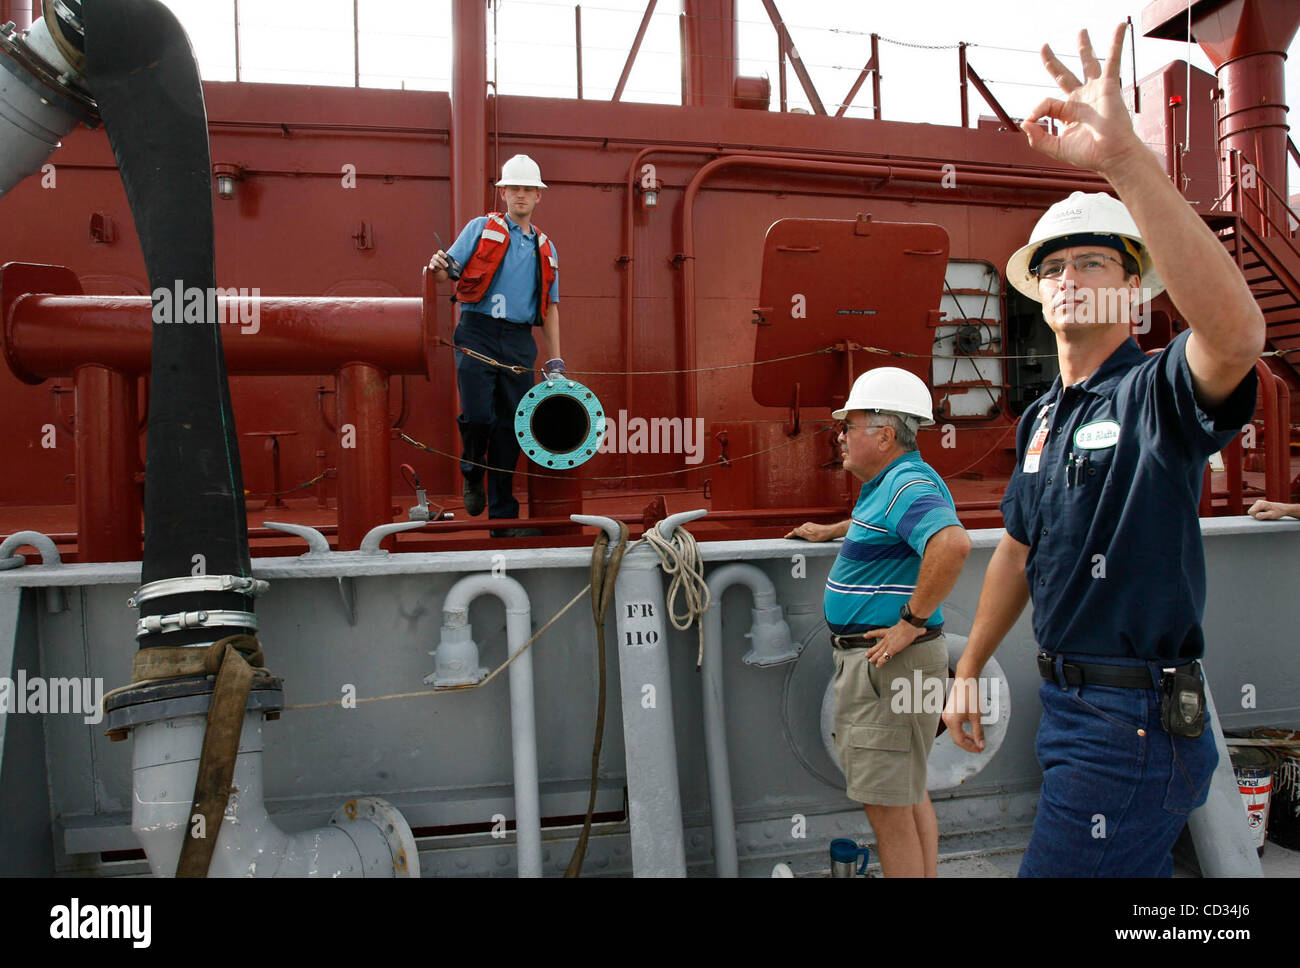 Tampa, FL (4/9/08)  CAPTION:  Port engineer Sam Schambeau (right) gives the OK when the Alafia docks alongside the S.S. American Victory outside of The Florida Aquarium in the Port of Tampa to begin the transfer of 300,000 gallons of salt water via pipeline from the barge to the aquarium's holding t Stock Photo